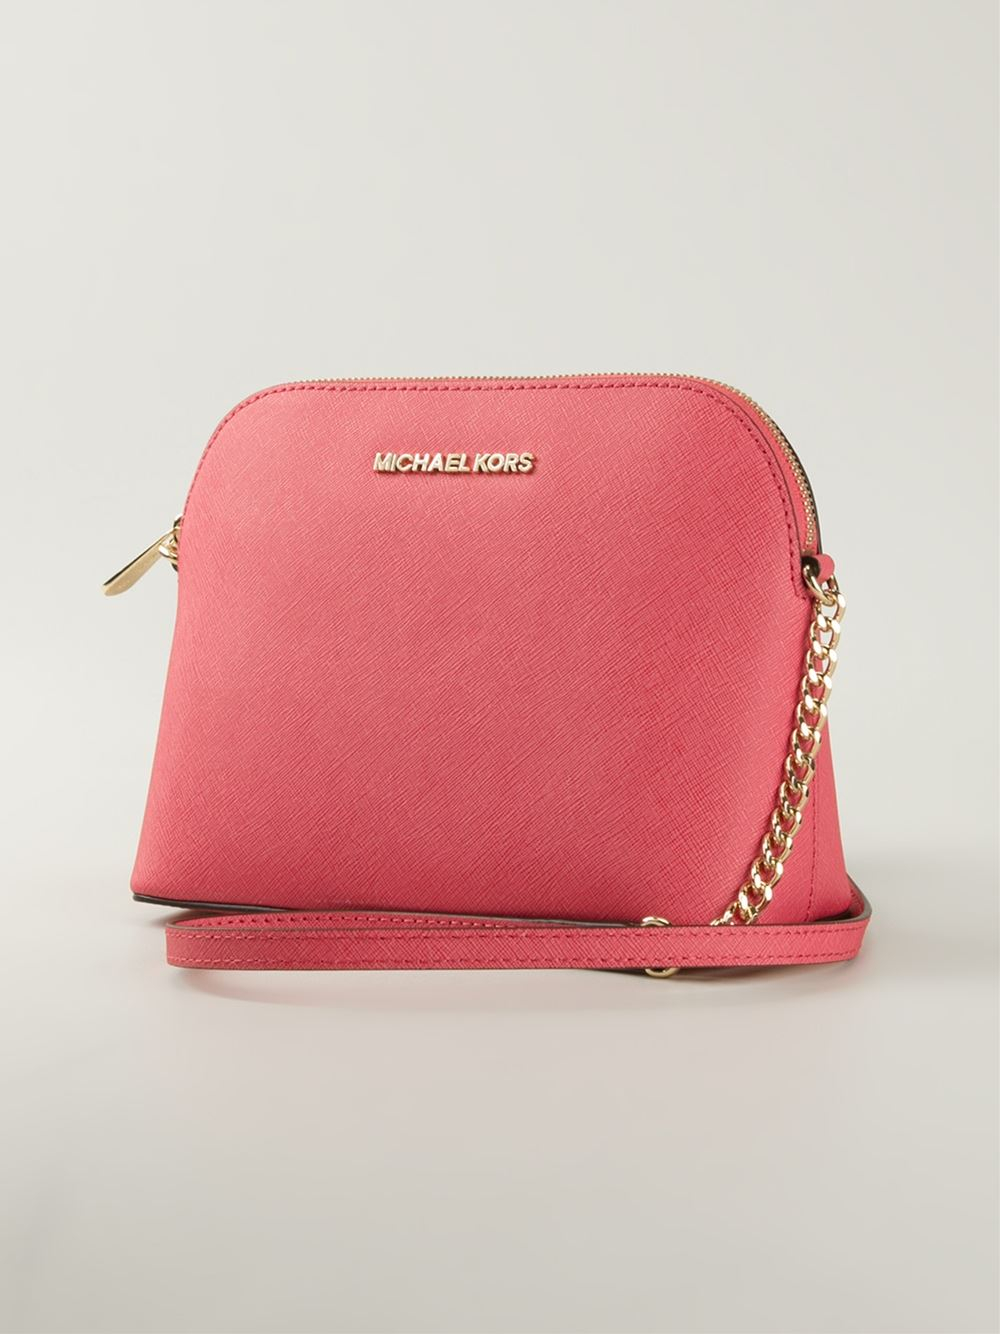 Lyst - Michael Michael Kors Cindy Leather Cross-Body Bag in Pink